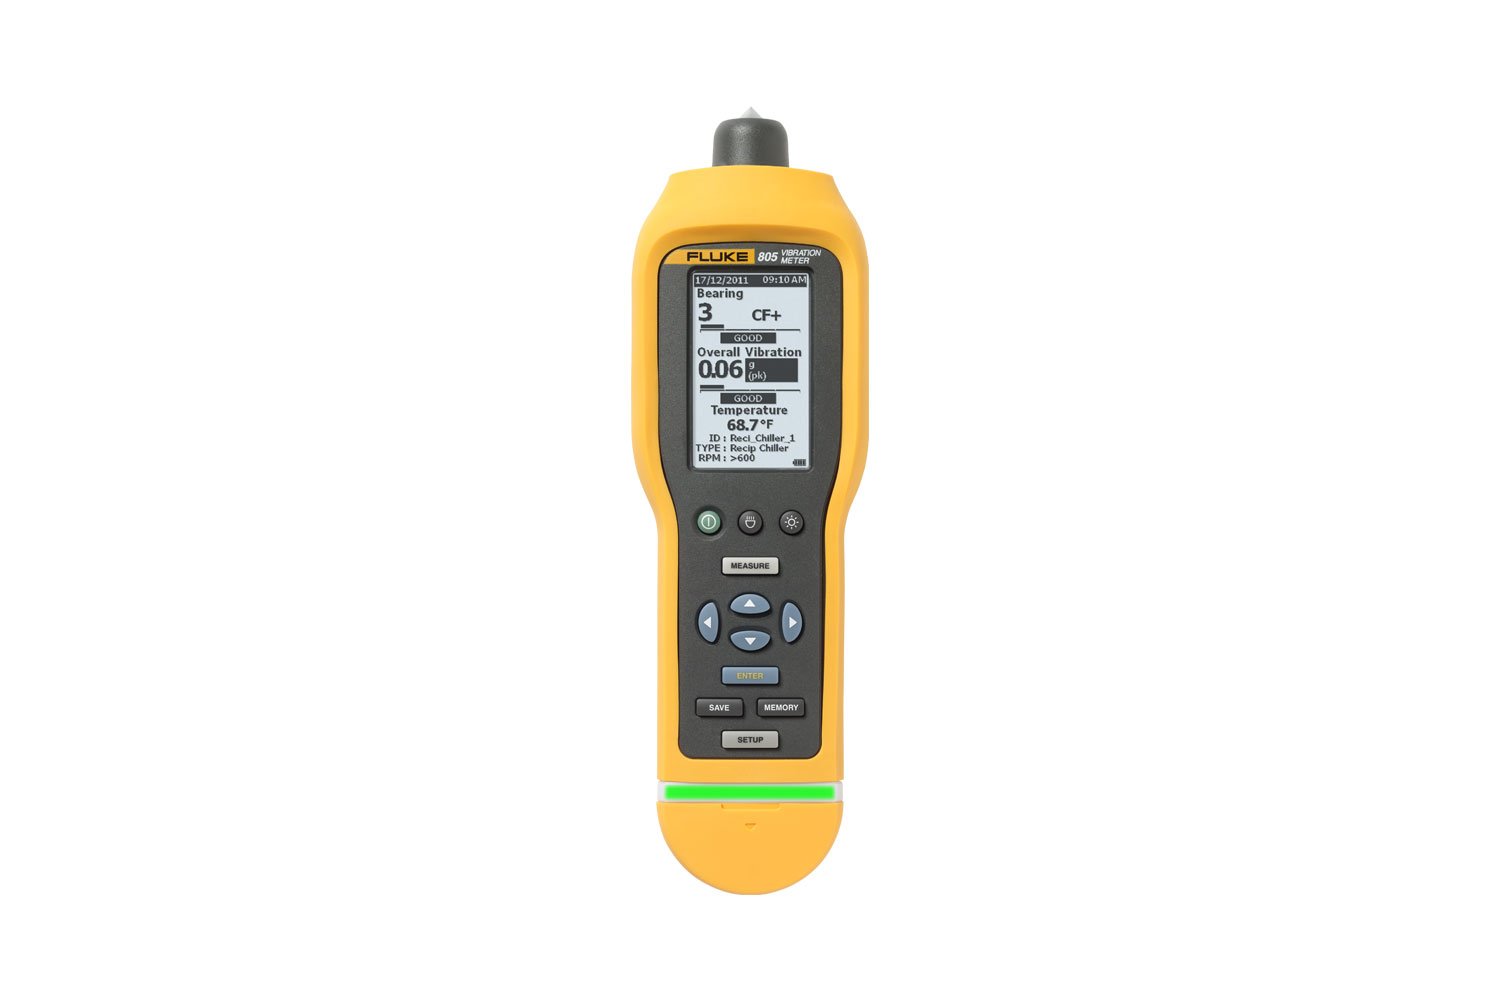 500g peak Vibration Limit 1000 Hz Frequency Fluke 805 Vibration Meter with Large High Resolution Screen 